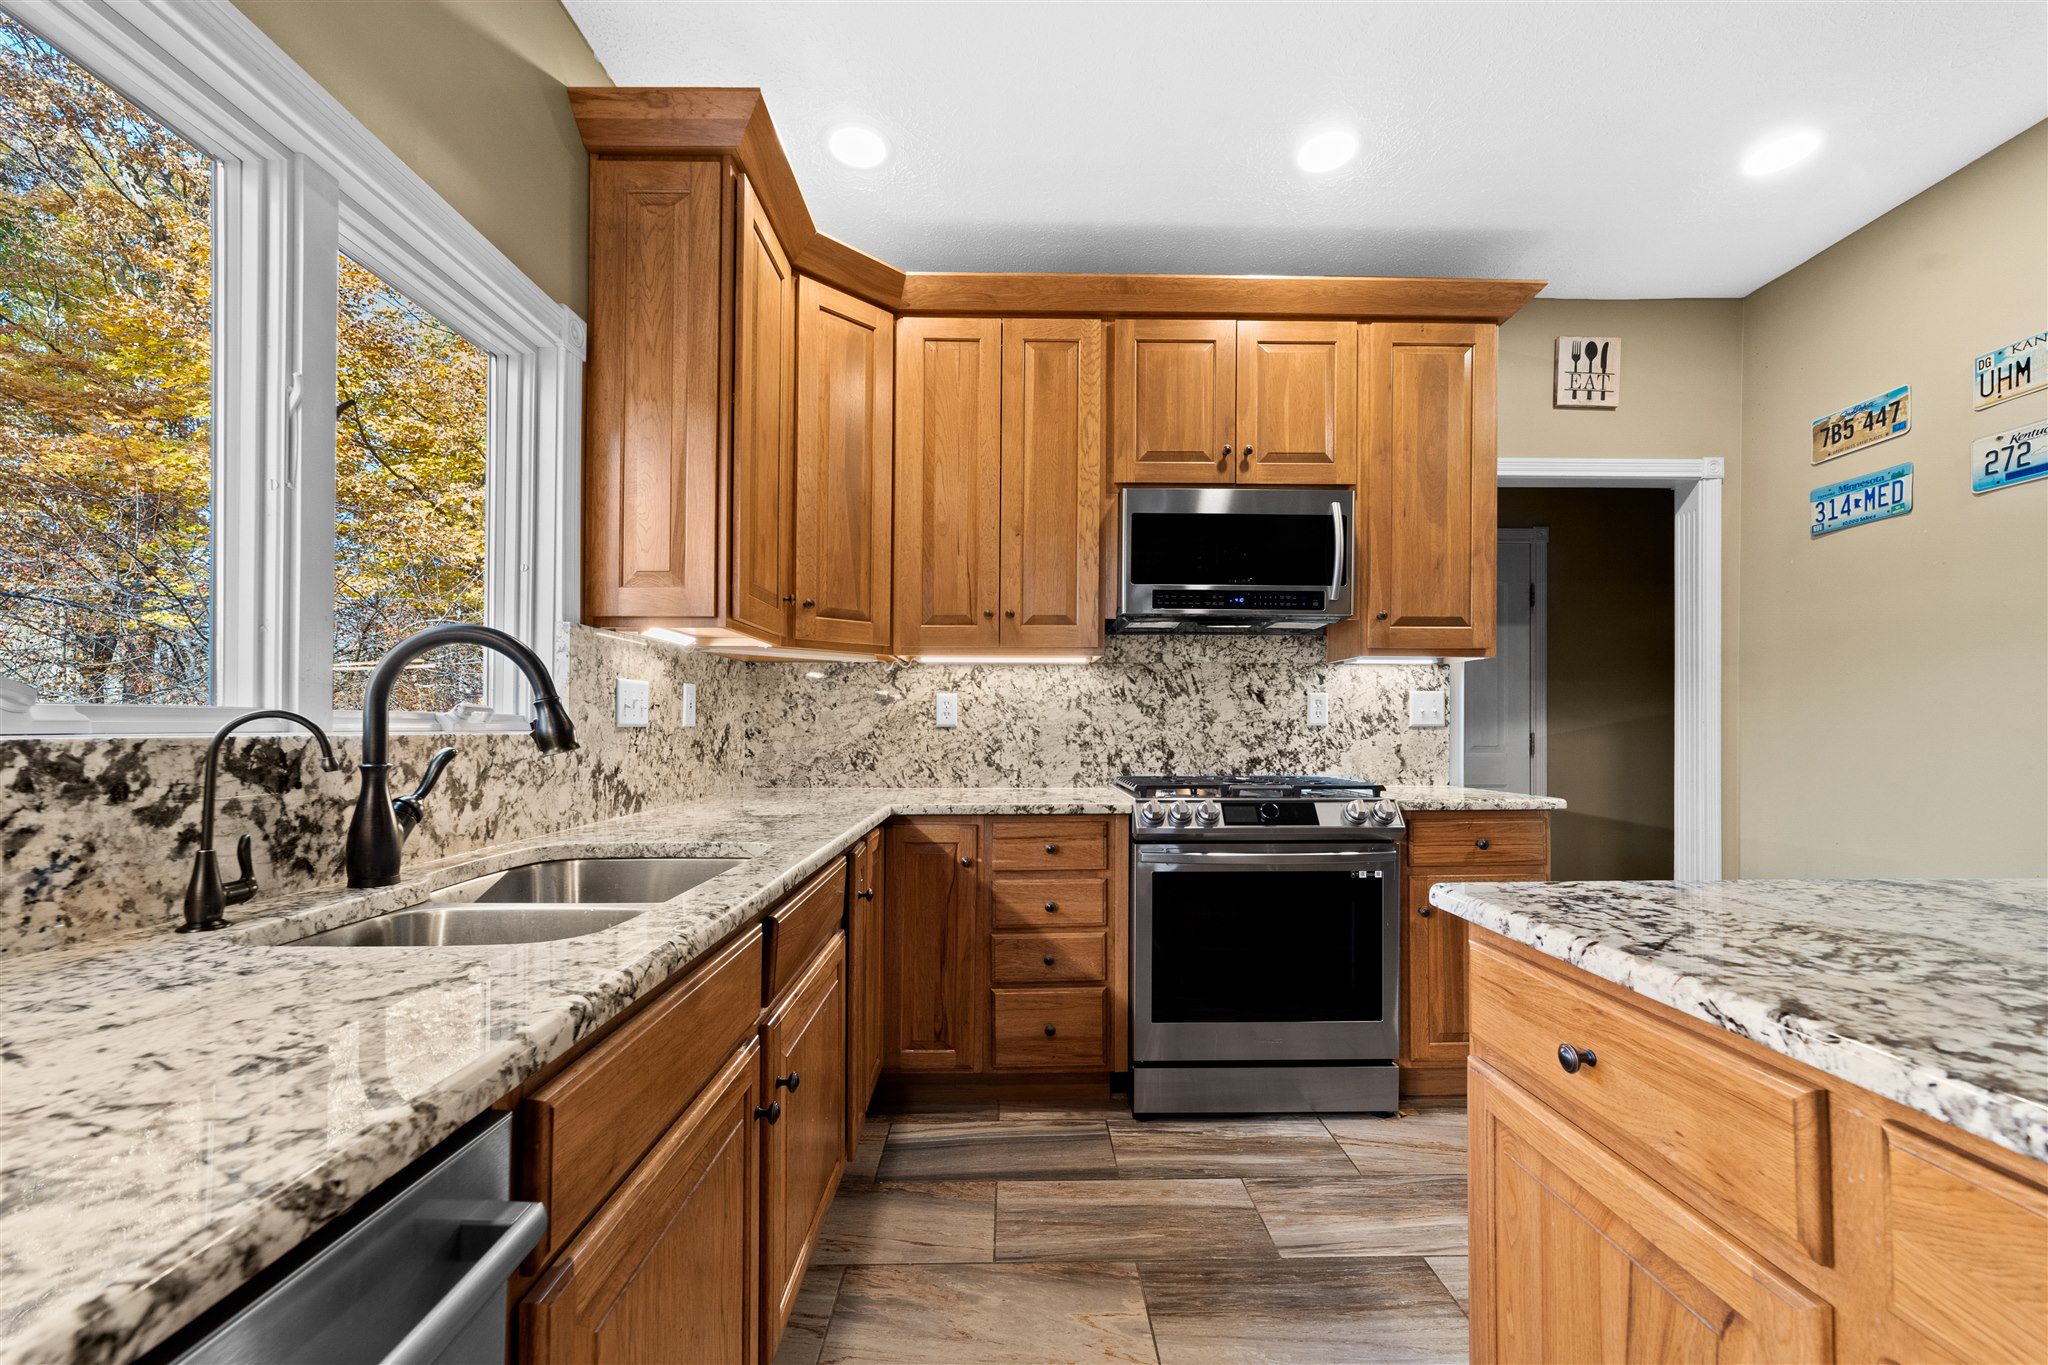 coors is excellent at wooden kitchen remodeling